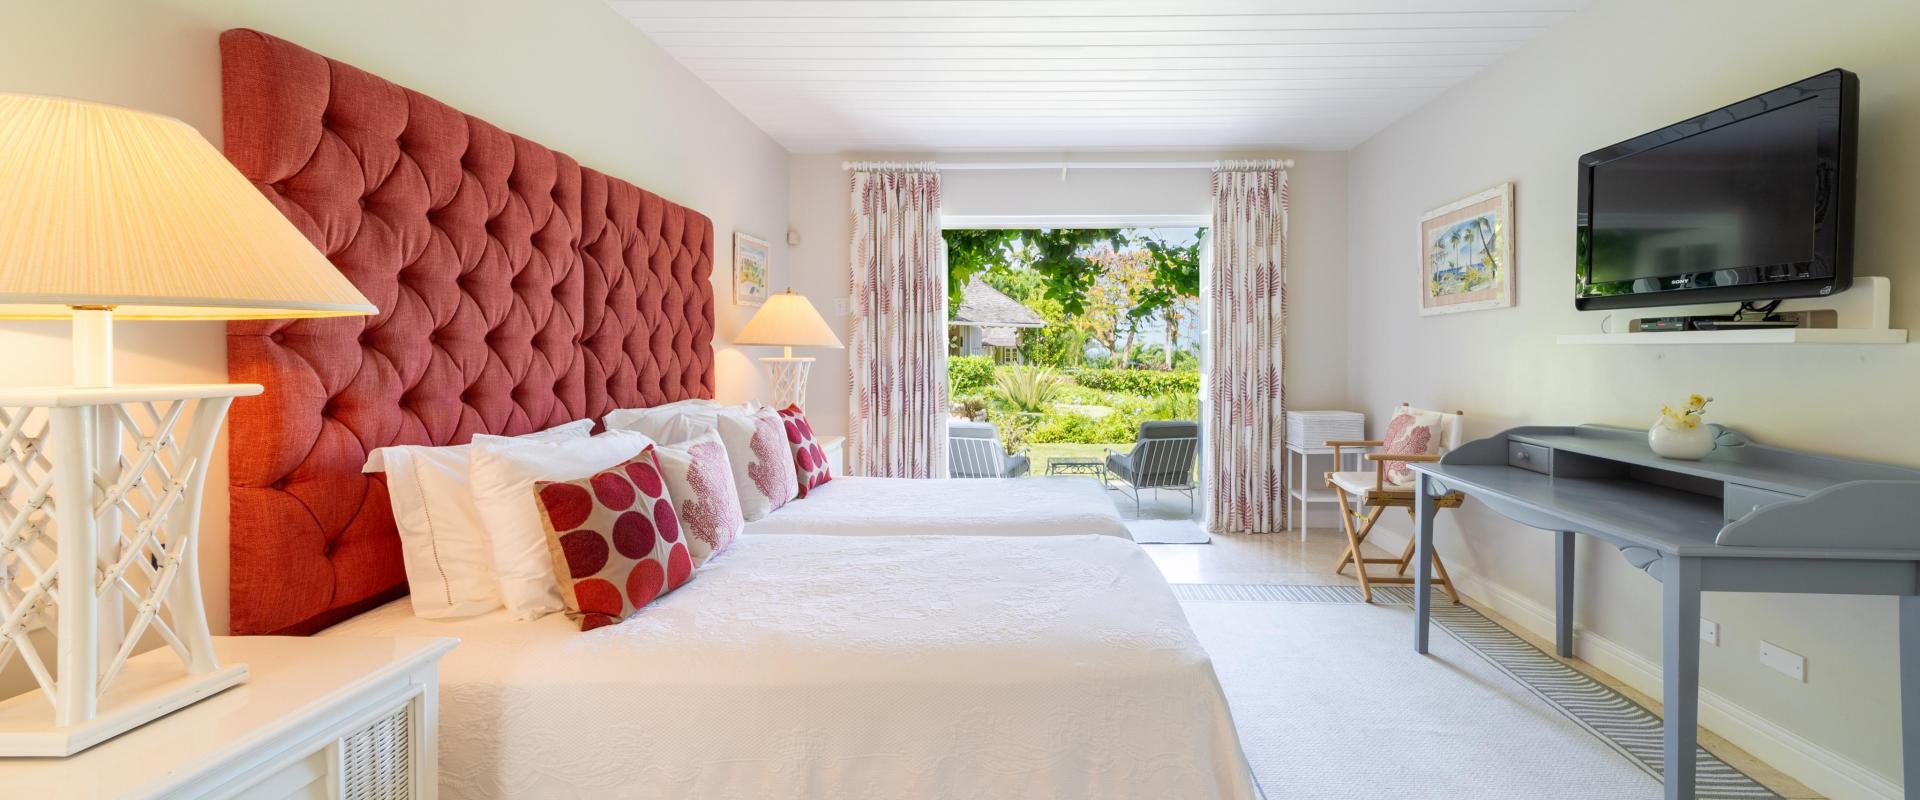 Point of View Holiday Rental In Sandy Lane Barbados Bedroom 2 With Patio and TV